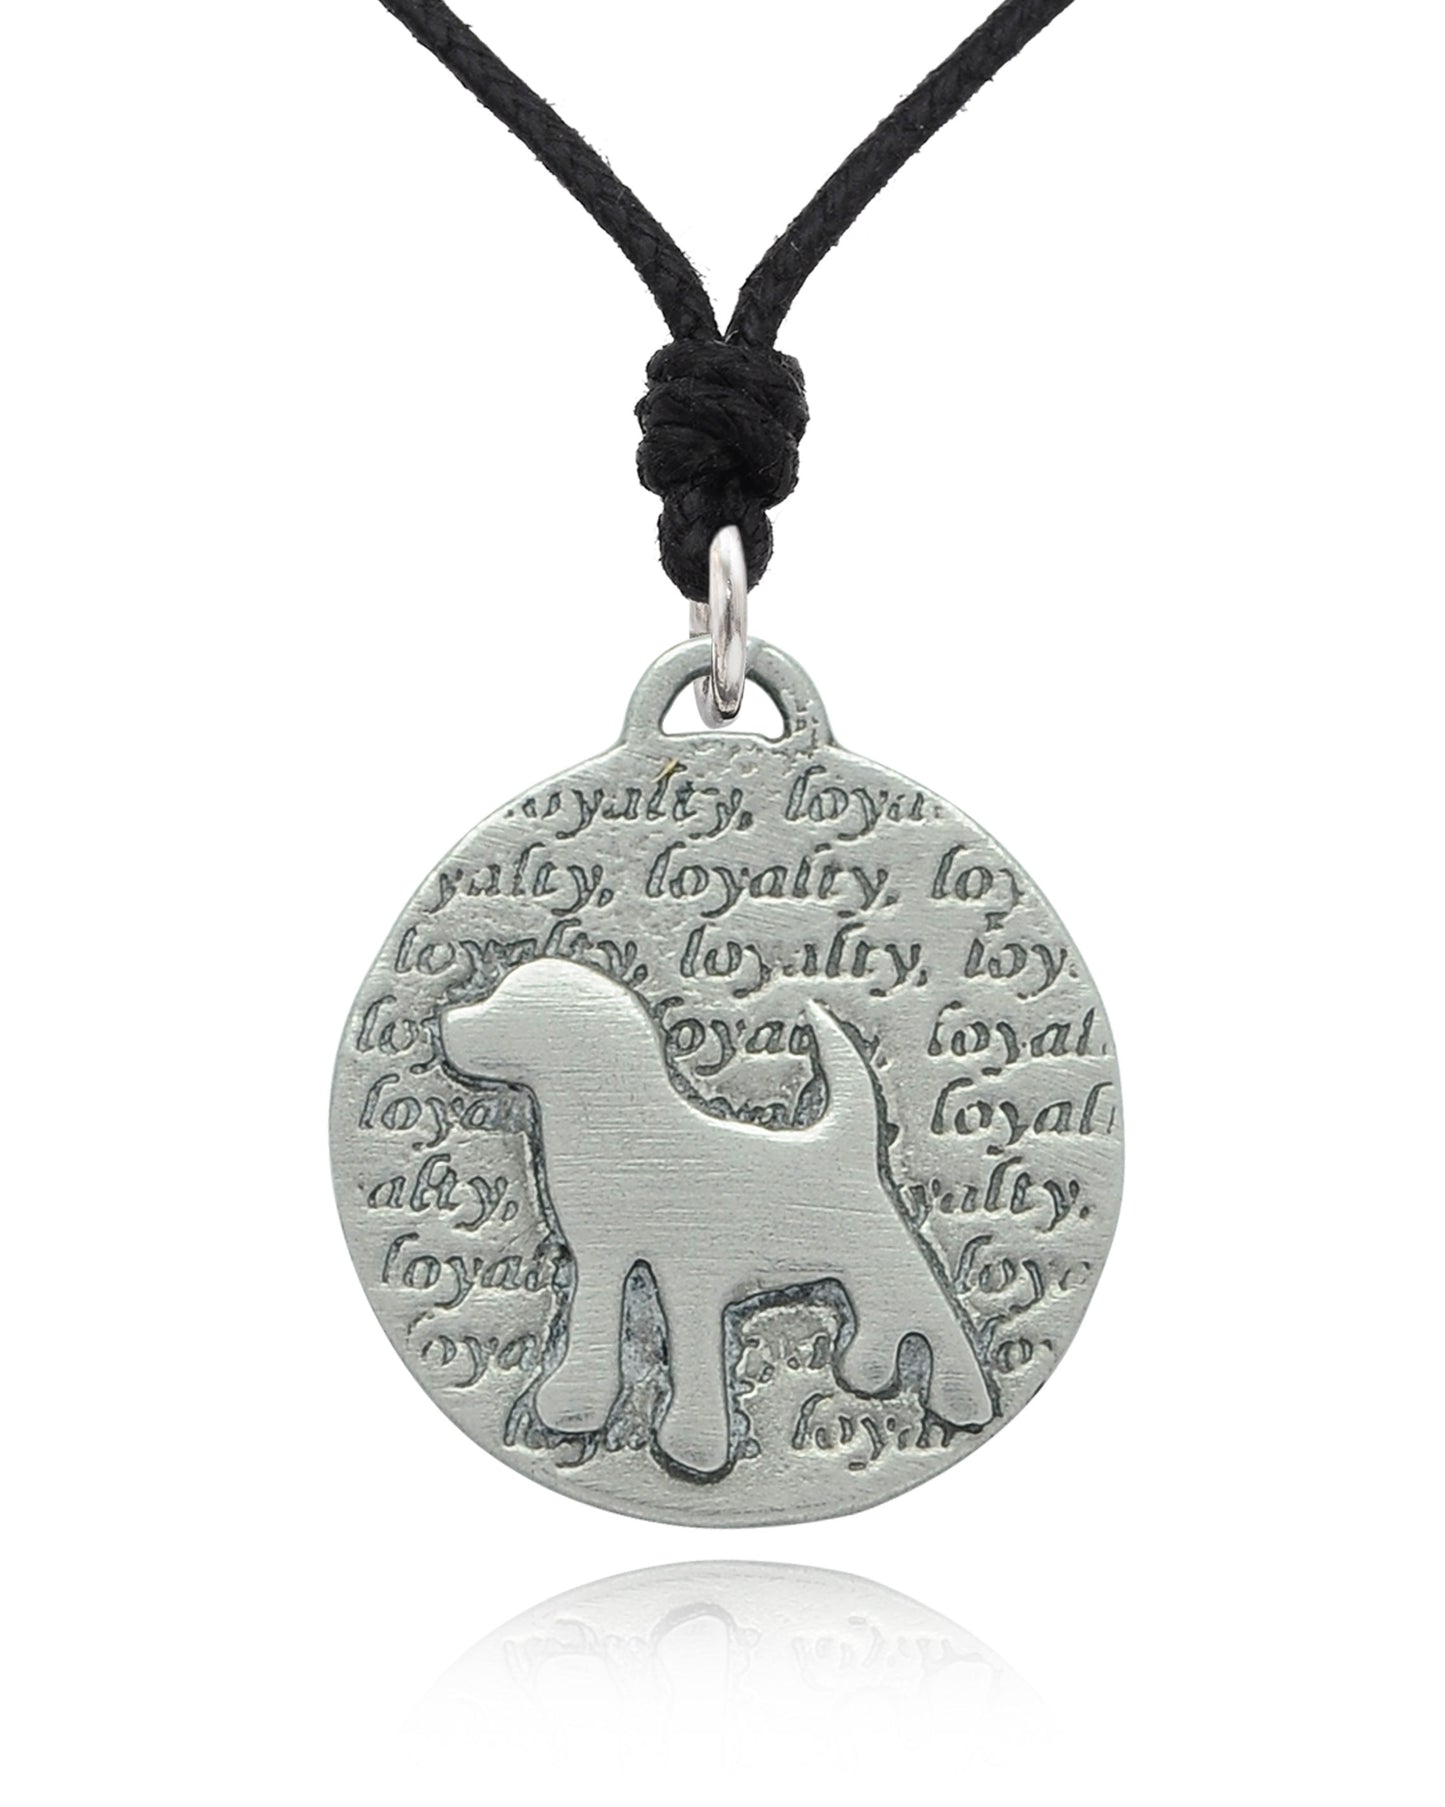 New Loyalty Dog Mans Best Friend Silver Pewter Charm Necklace Pendant Jewelry